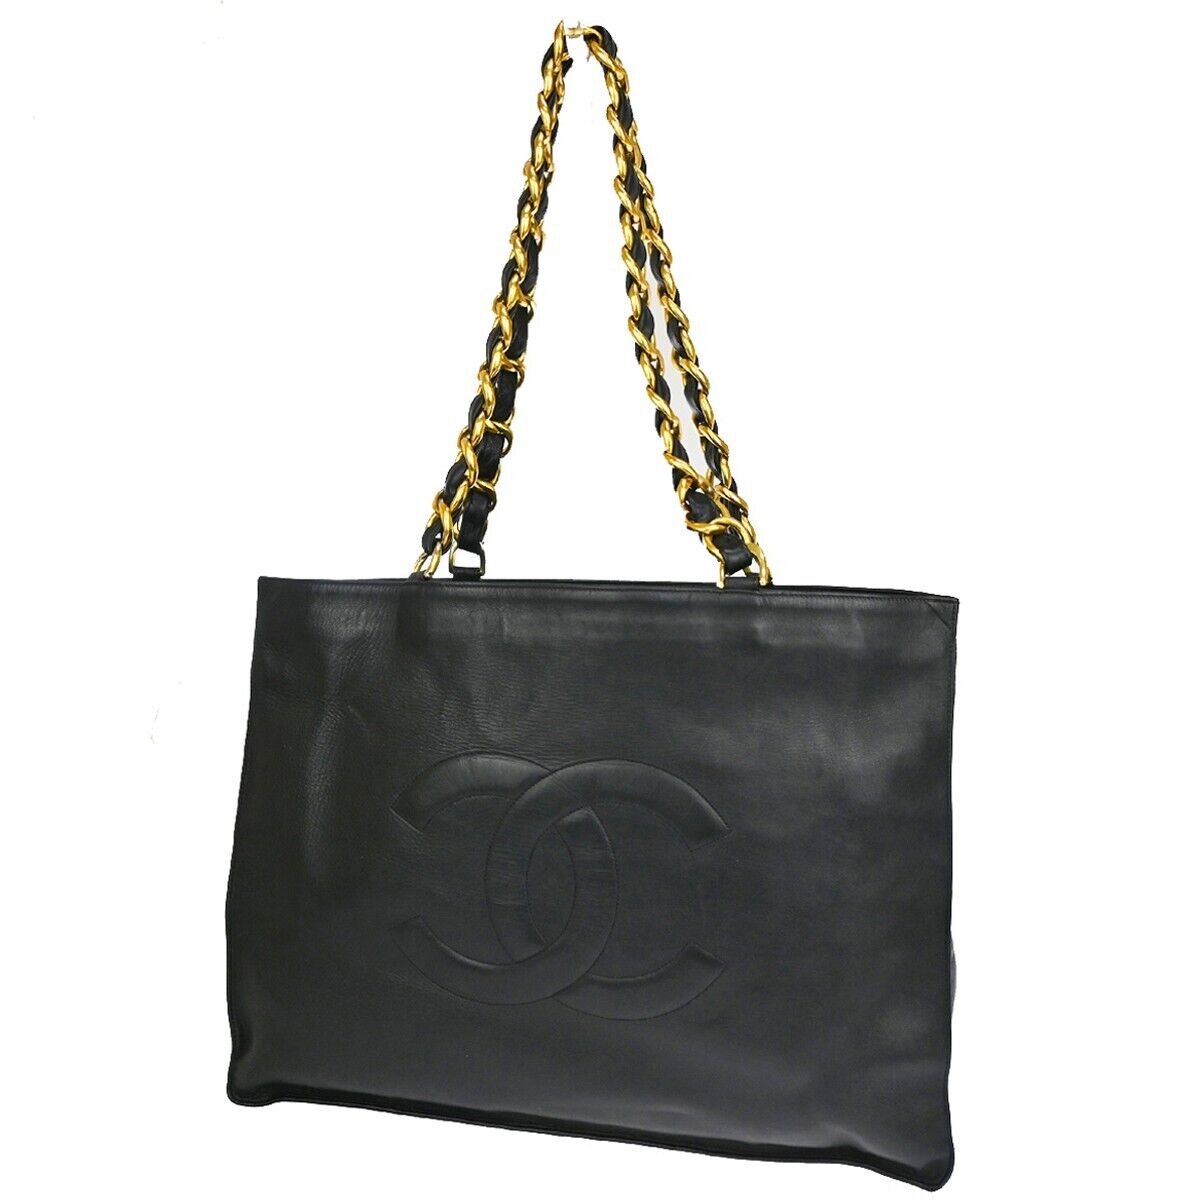 CHANEL Chanel Vintage CC Tote in Black Lambskin w/Chunky Chain - Vault 55